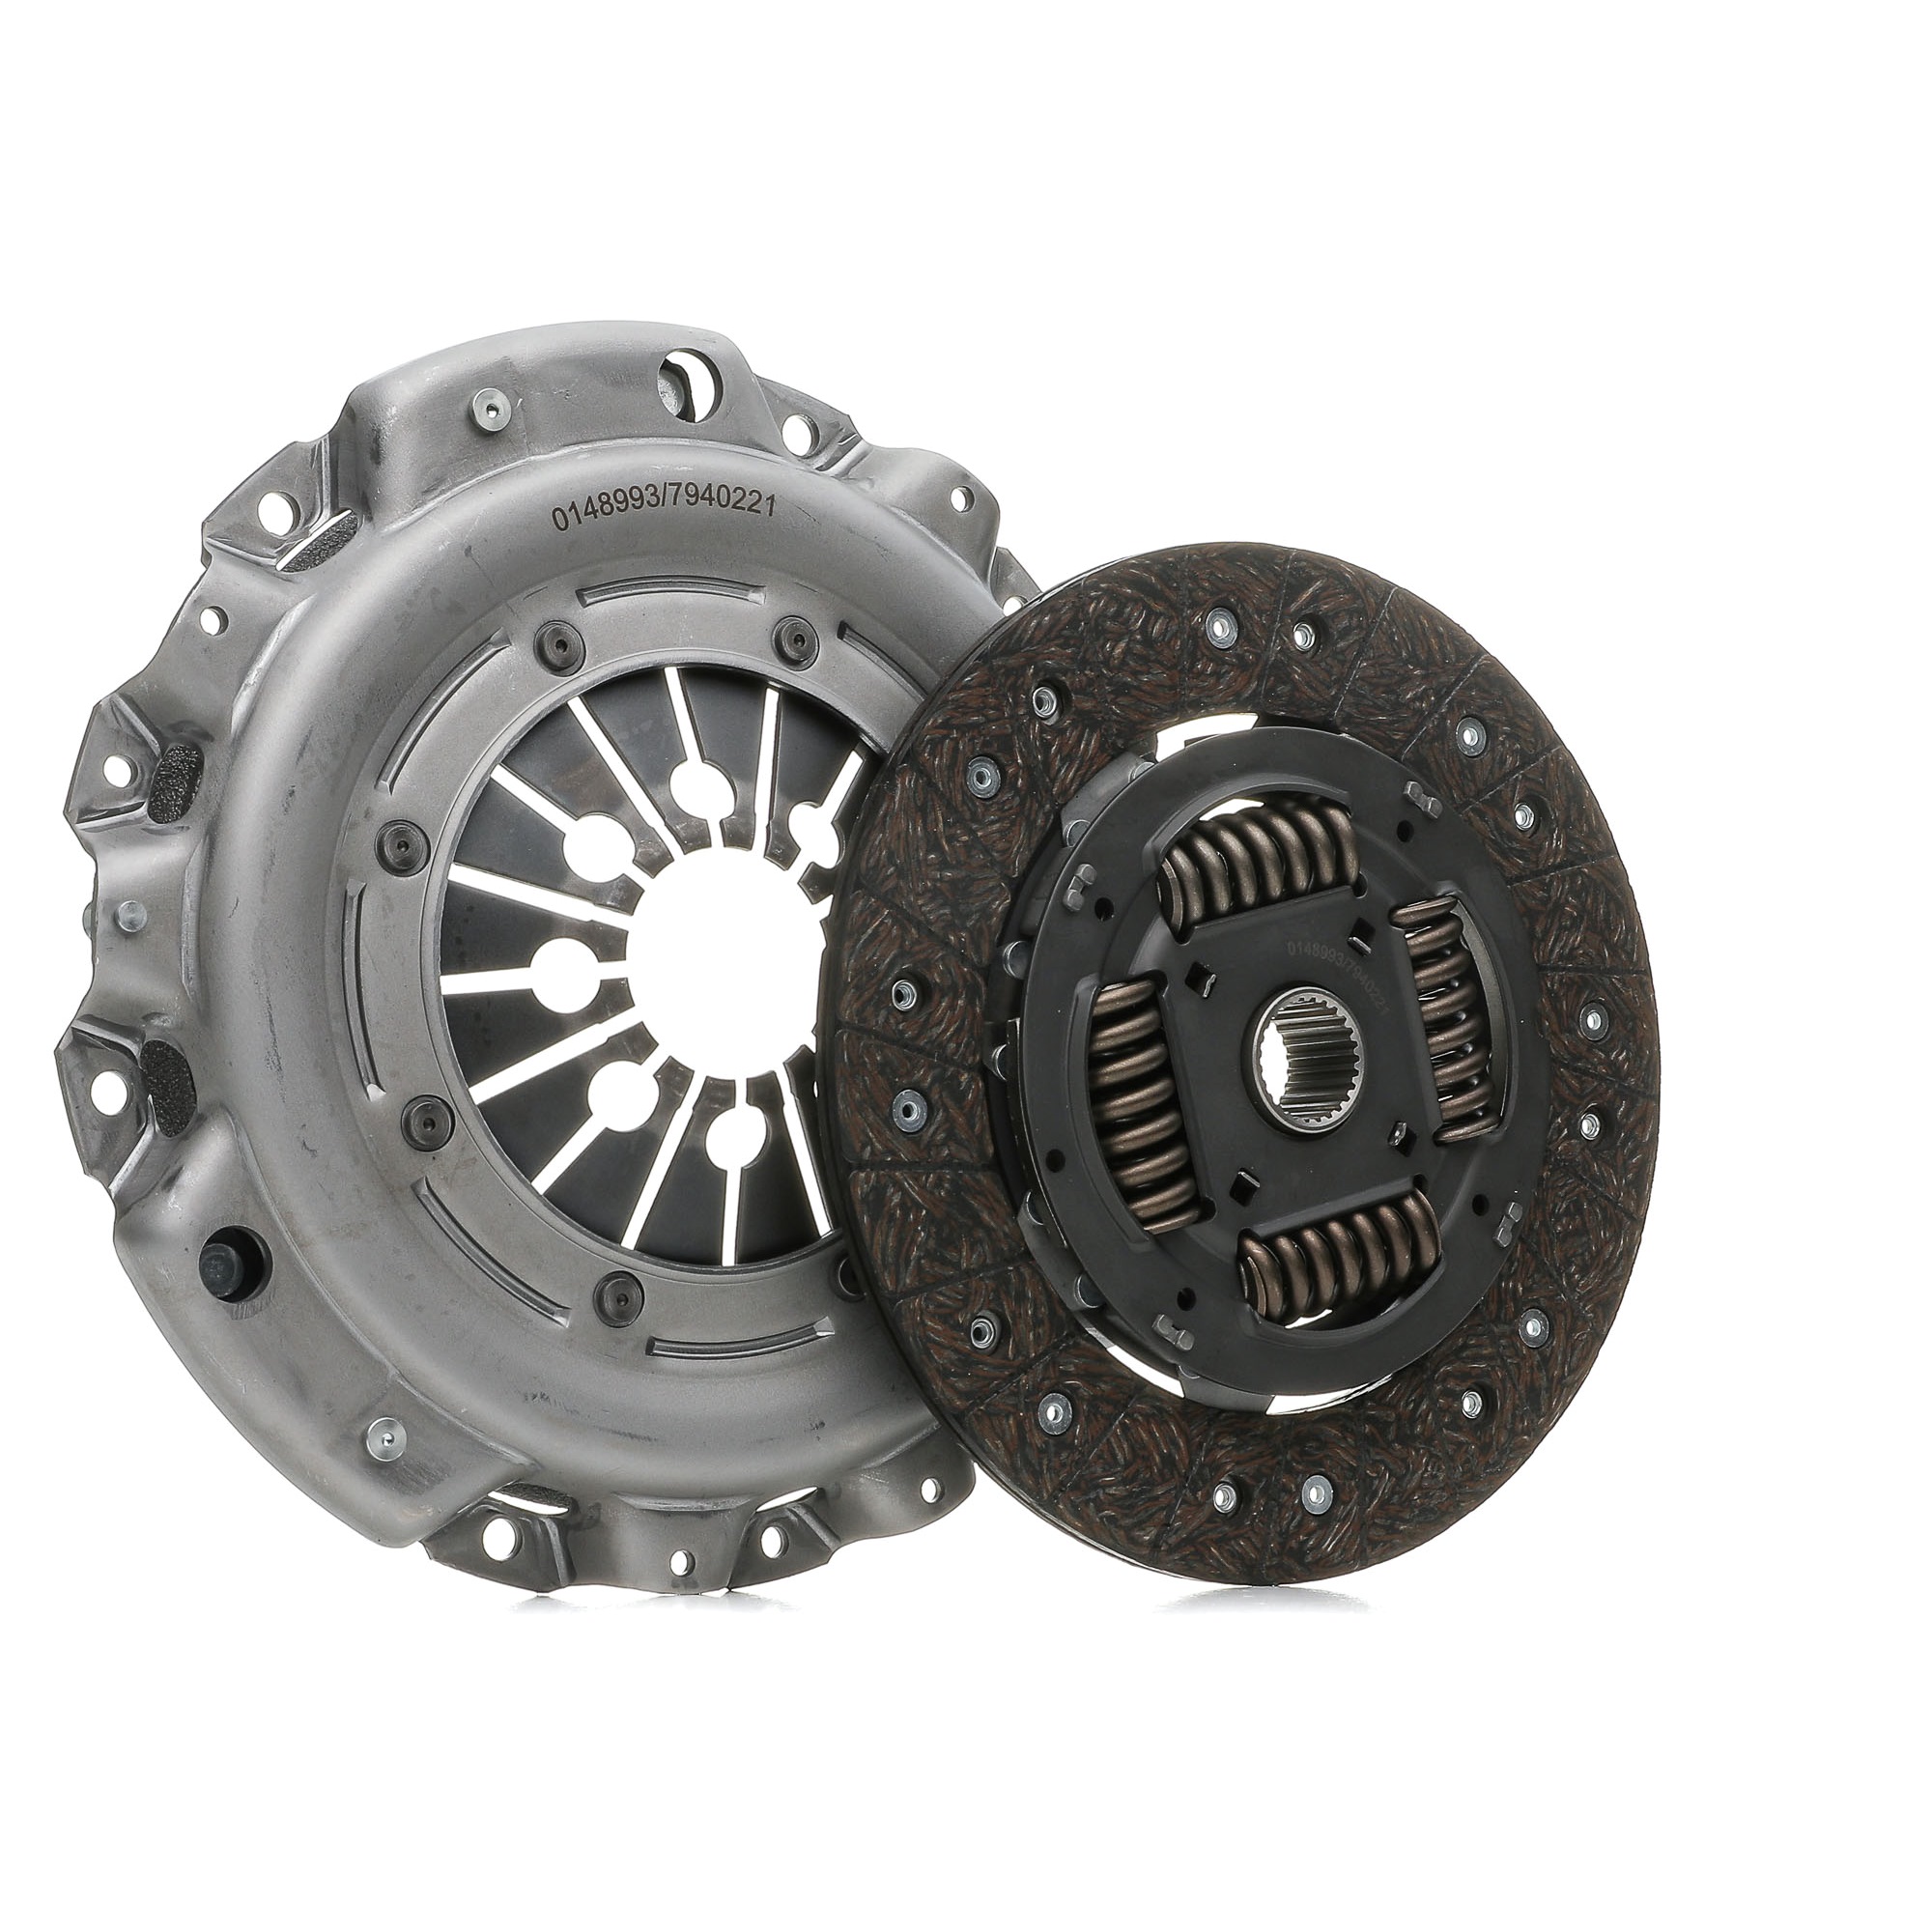 STARK SKCK-0100062 Clutch kit with clutch pressure plate, without central slave cylinder, without clutch release bearing, with clutch disc, 240mm